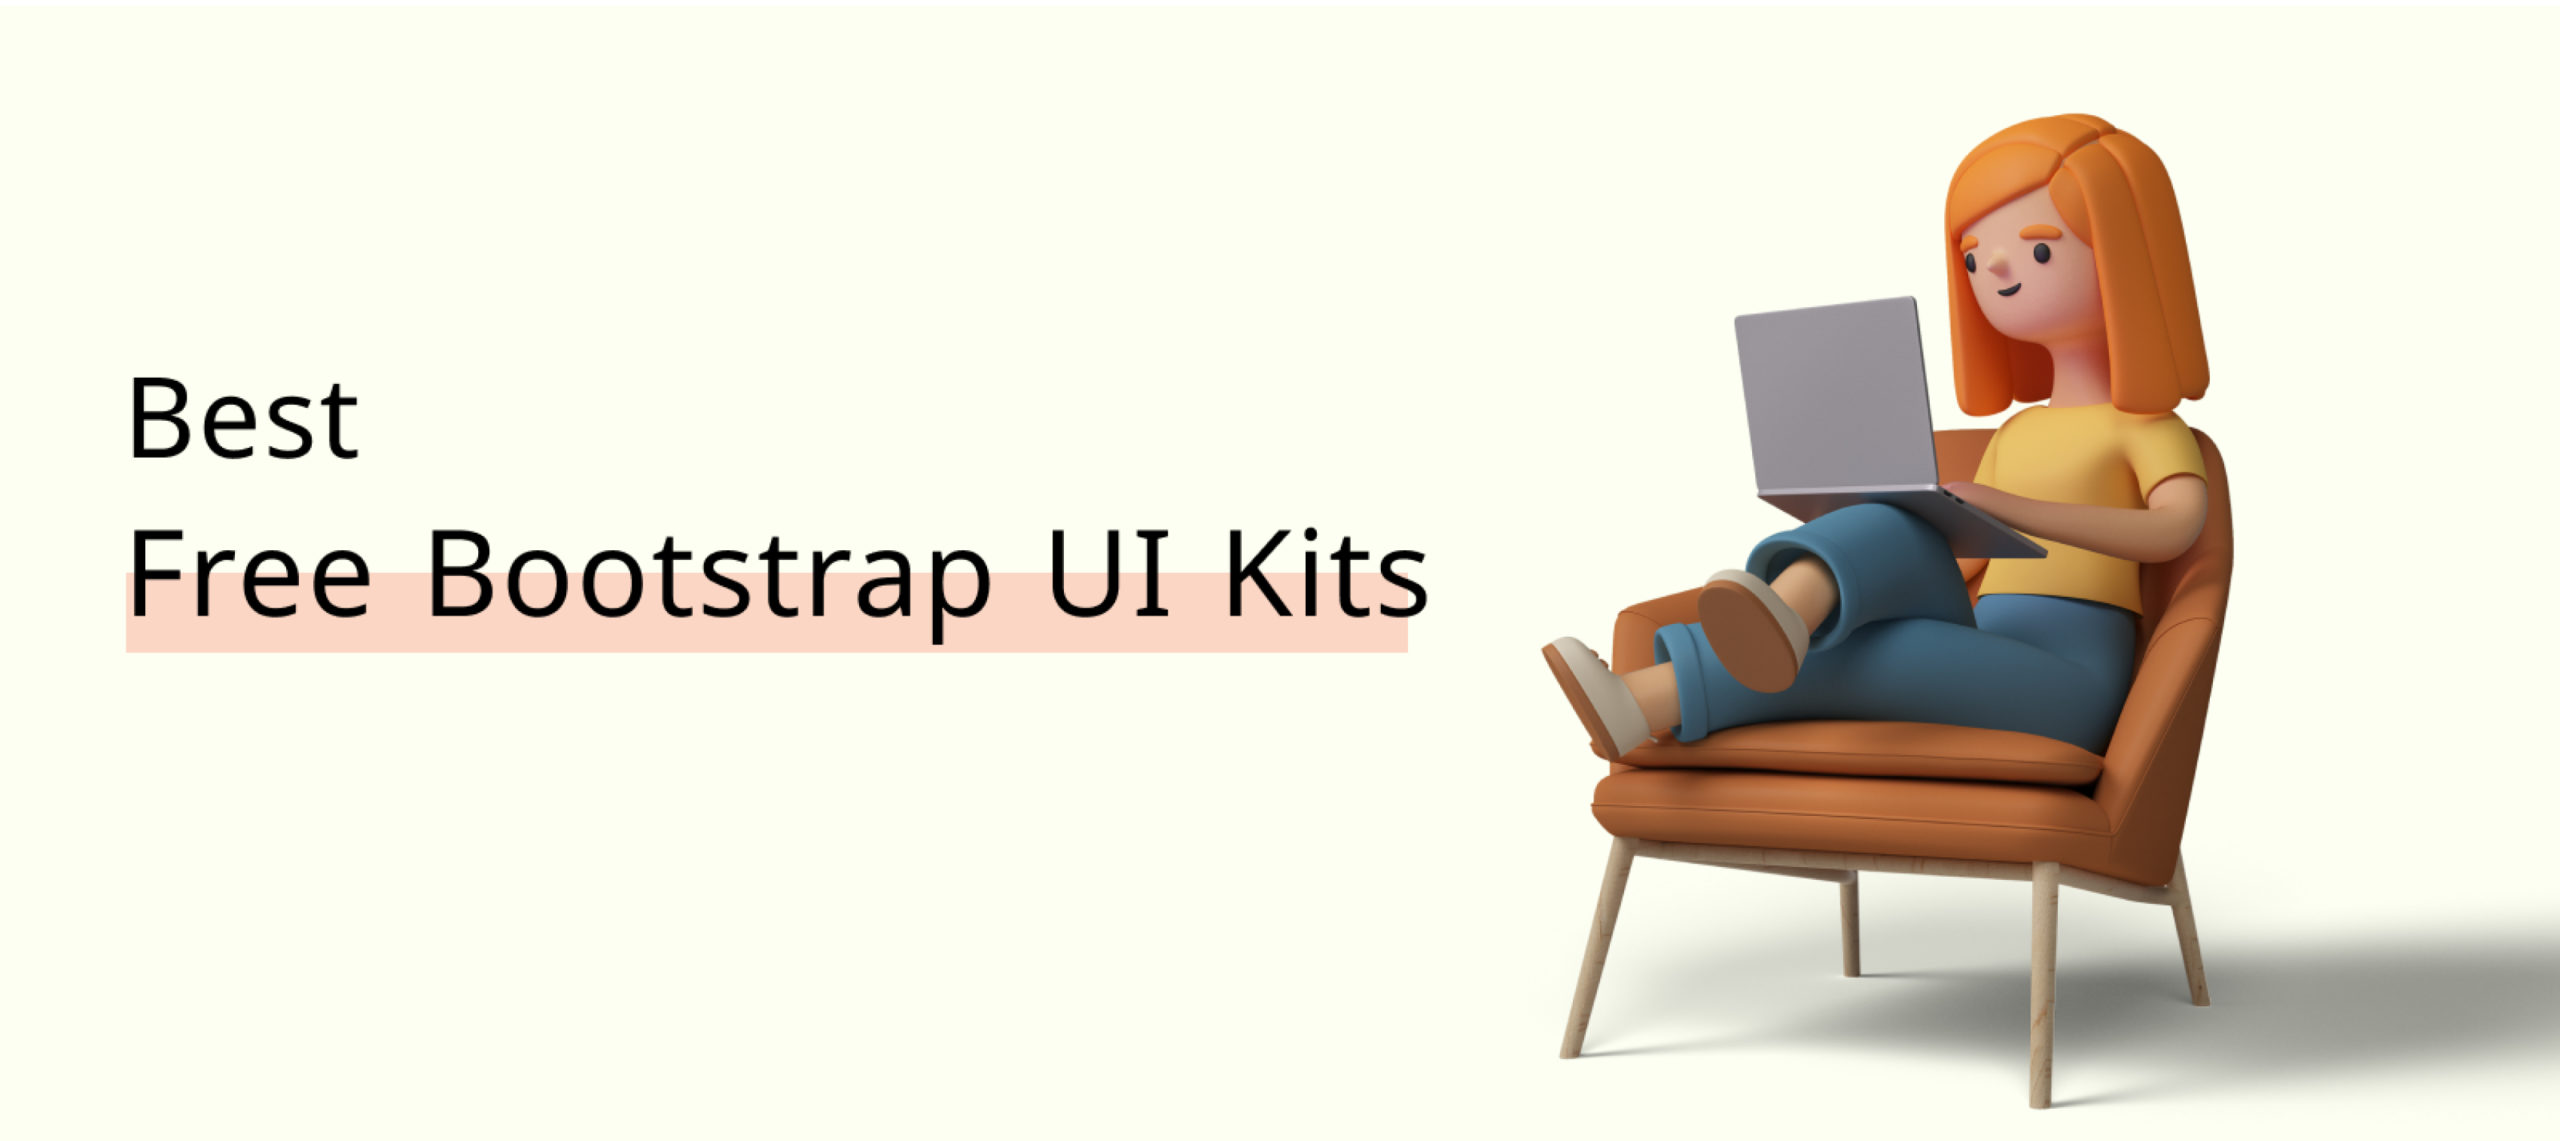  Best Free Bootstrap UI Kits in 2022